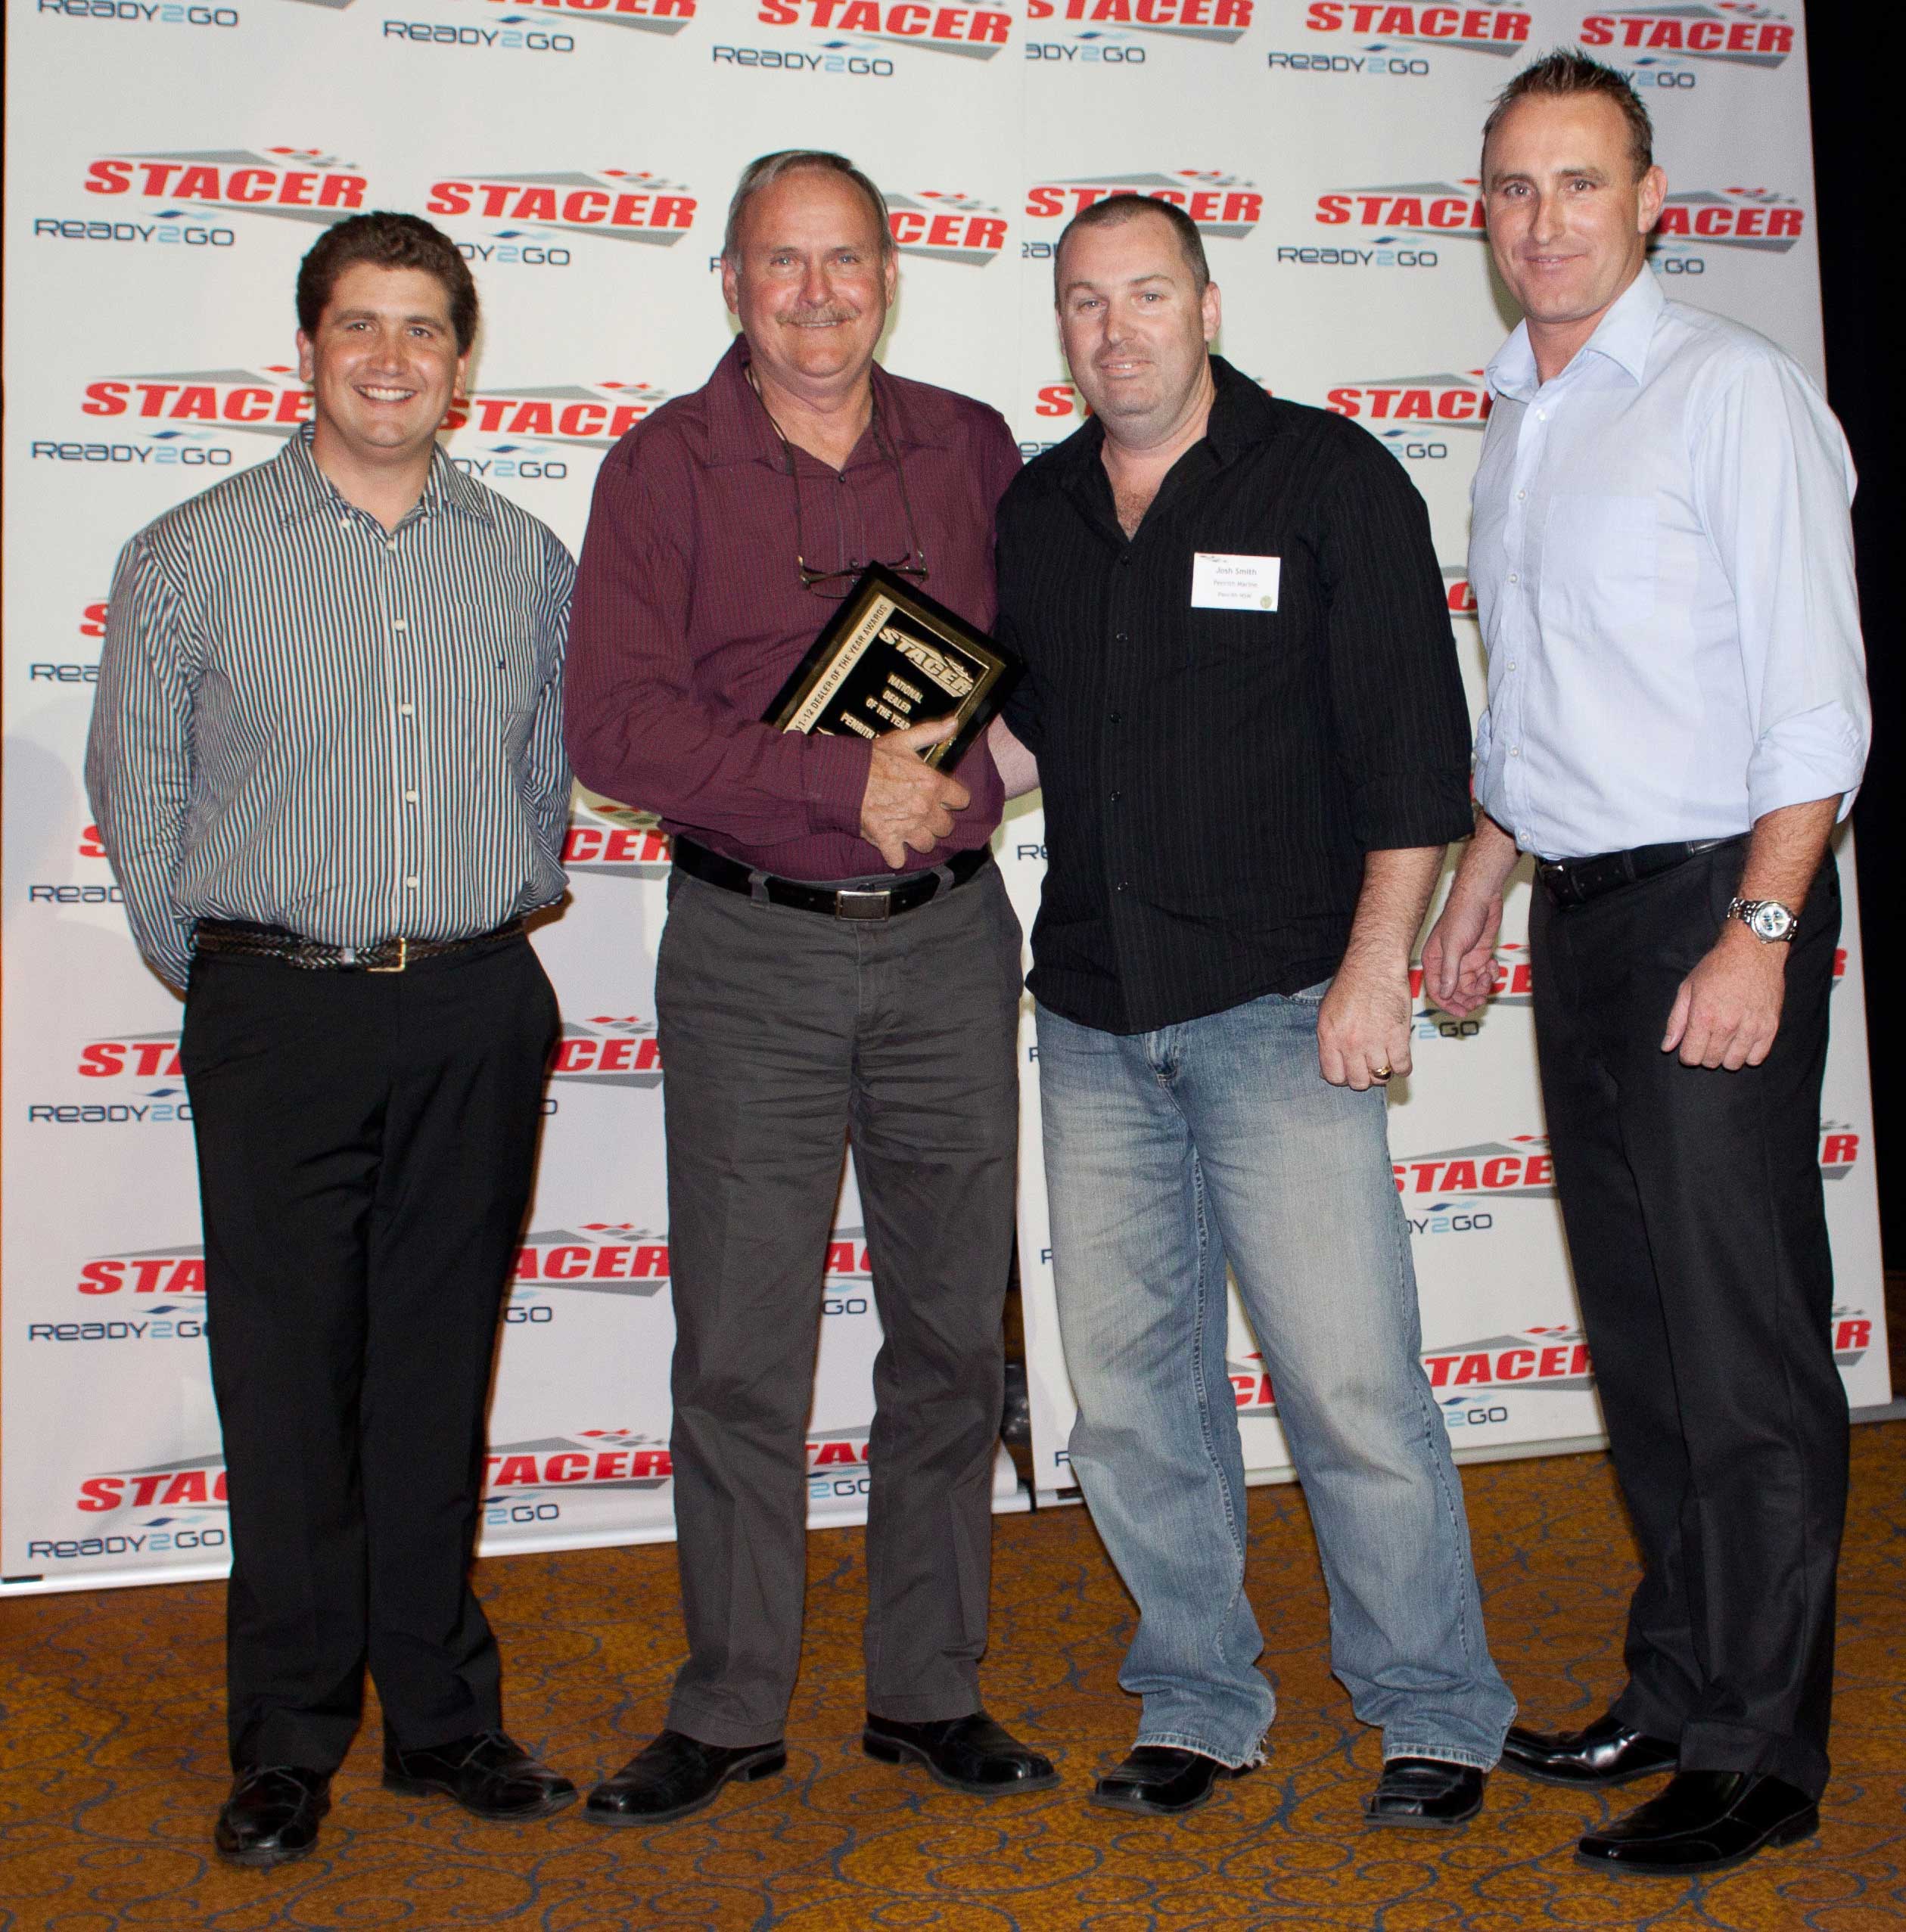 Stacer Dealer of the Year for 2012 - Penrith Marine